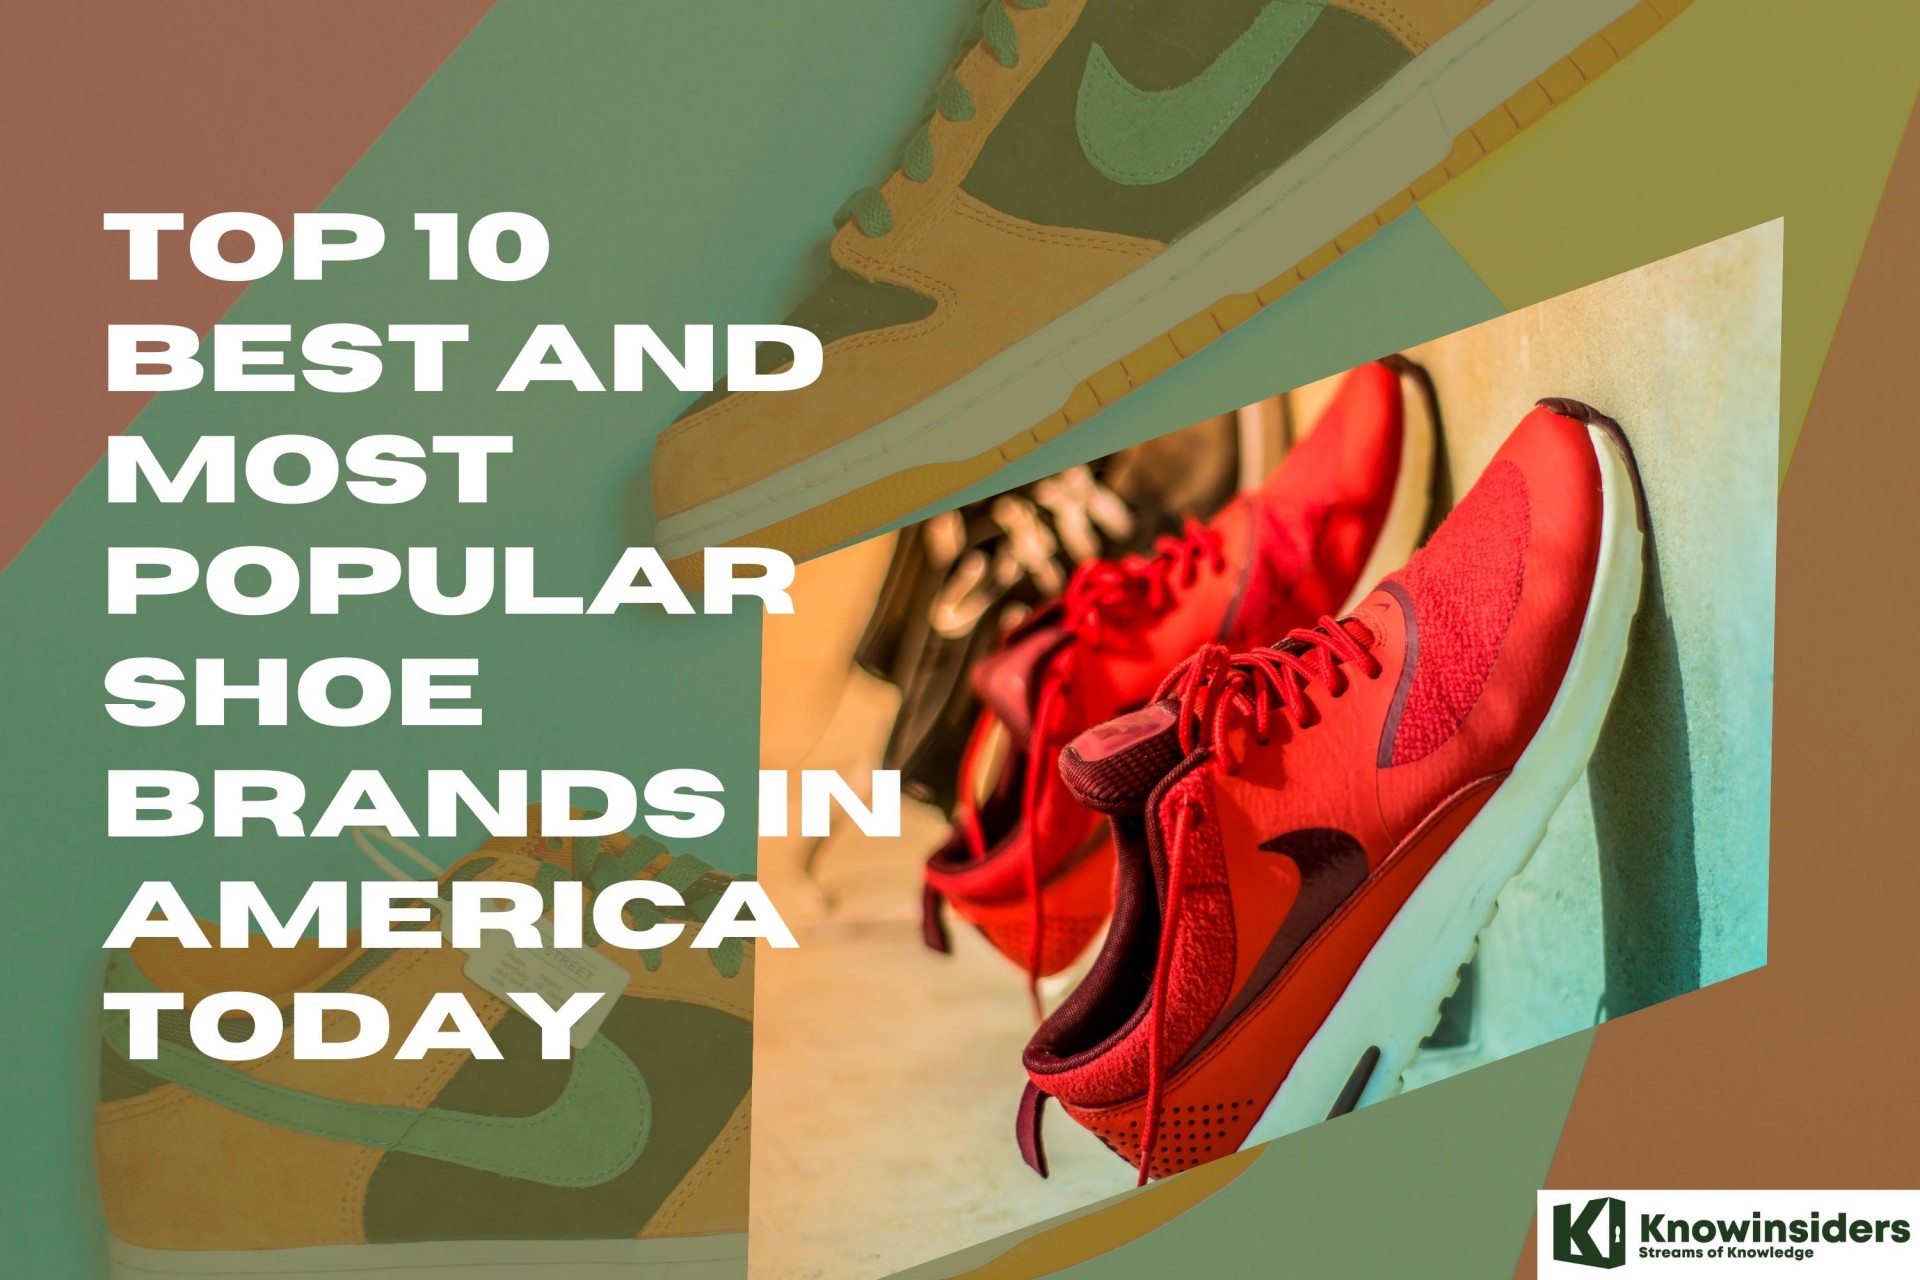 Top 10 Best and Most Popular Shoe Brands In America Today